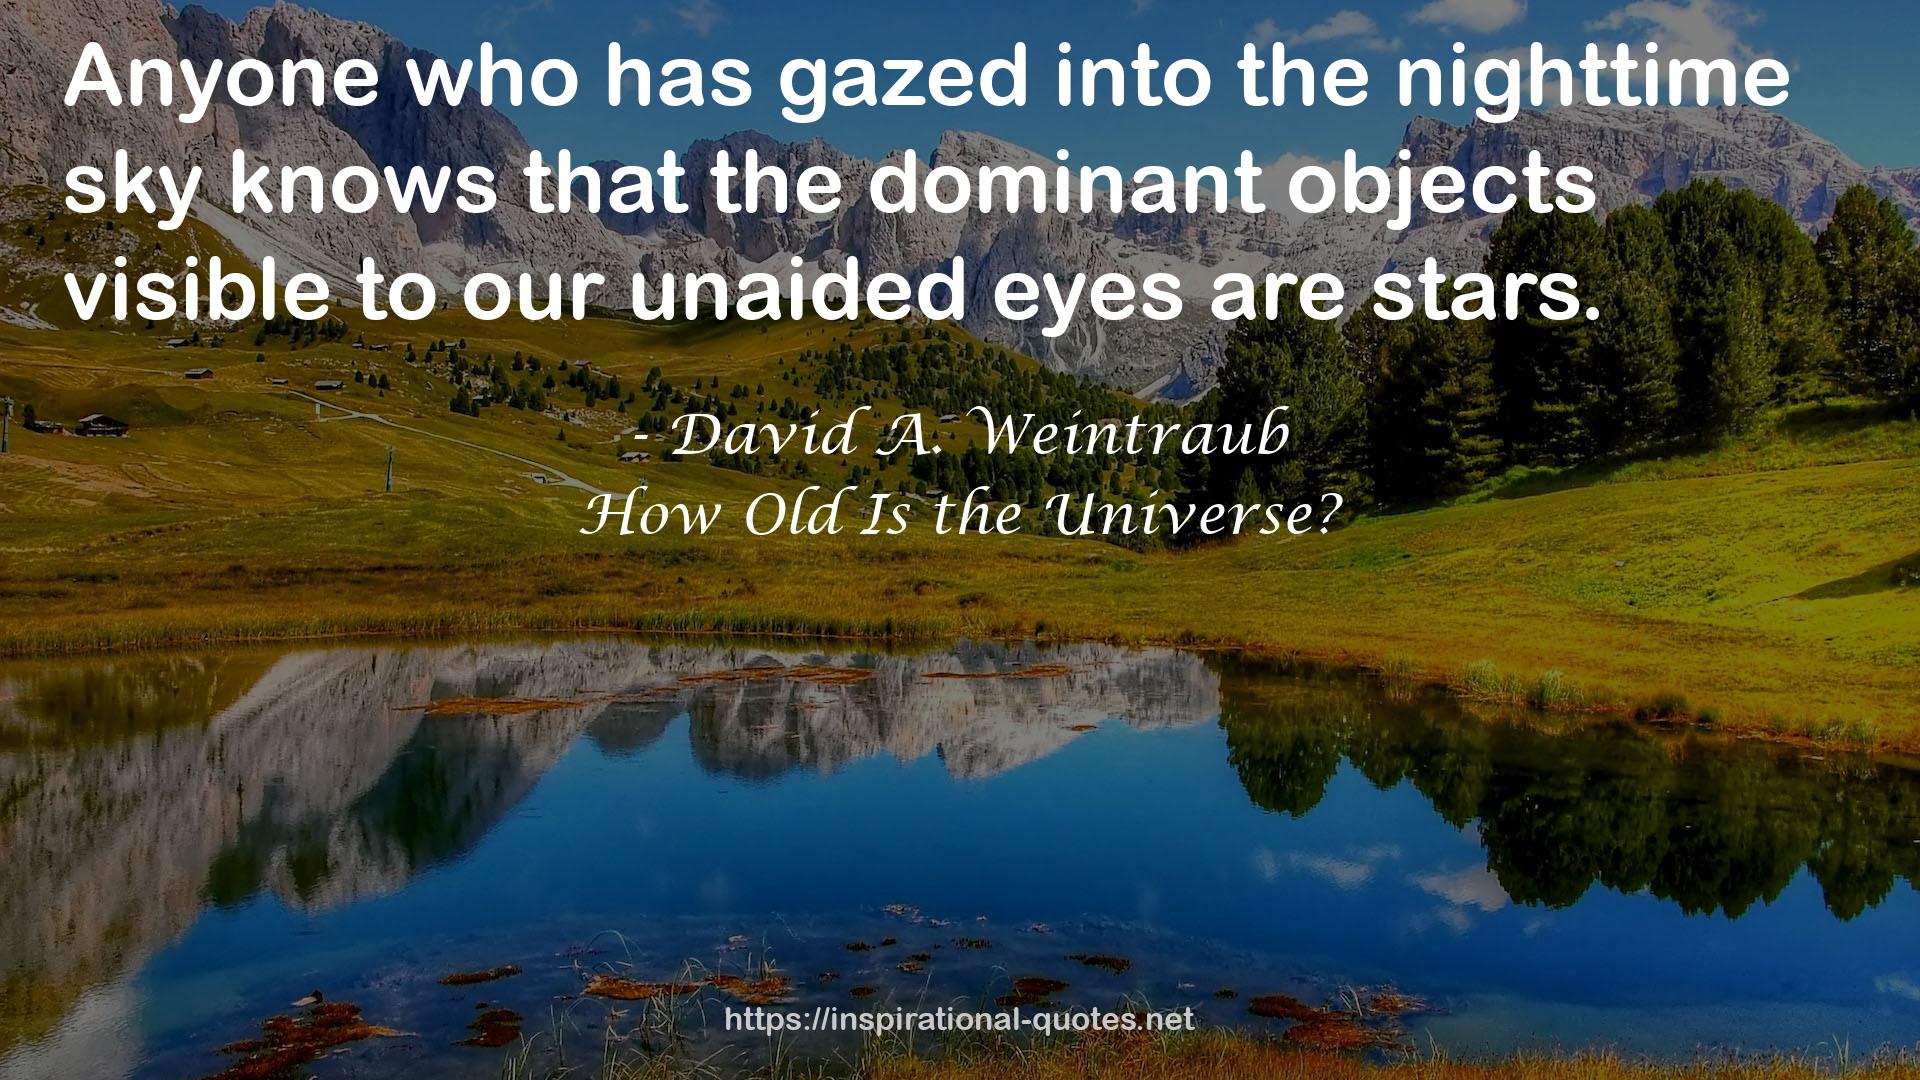 How Old Is the Universe? QUOTES